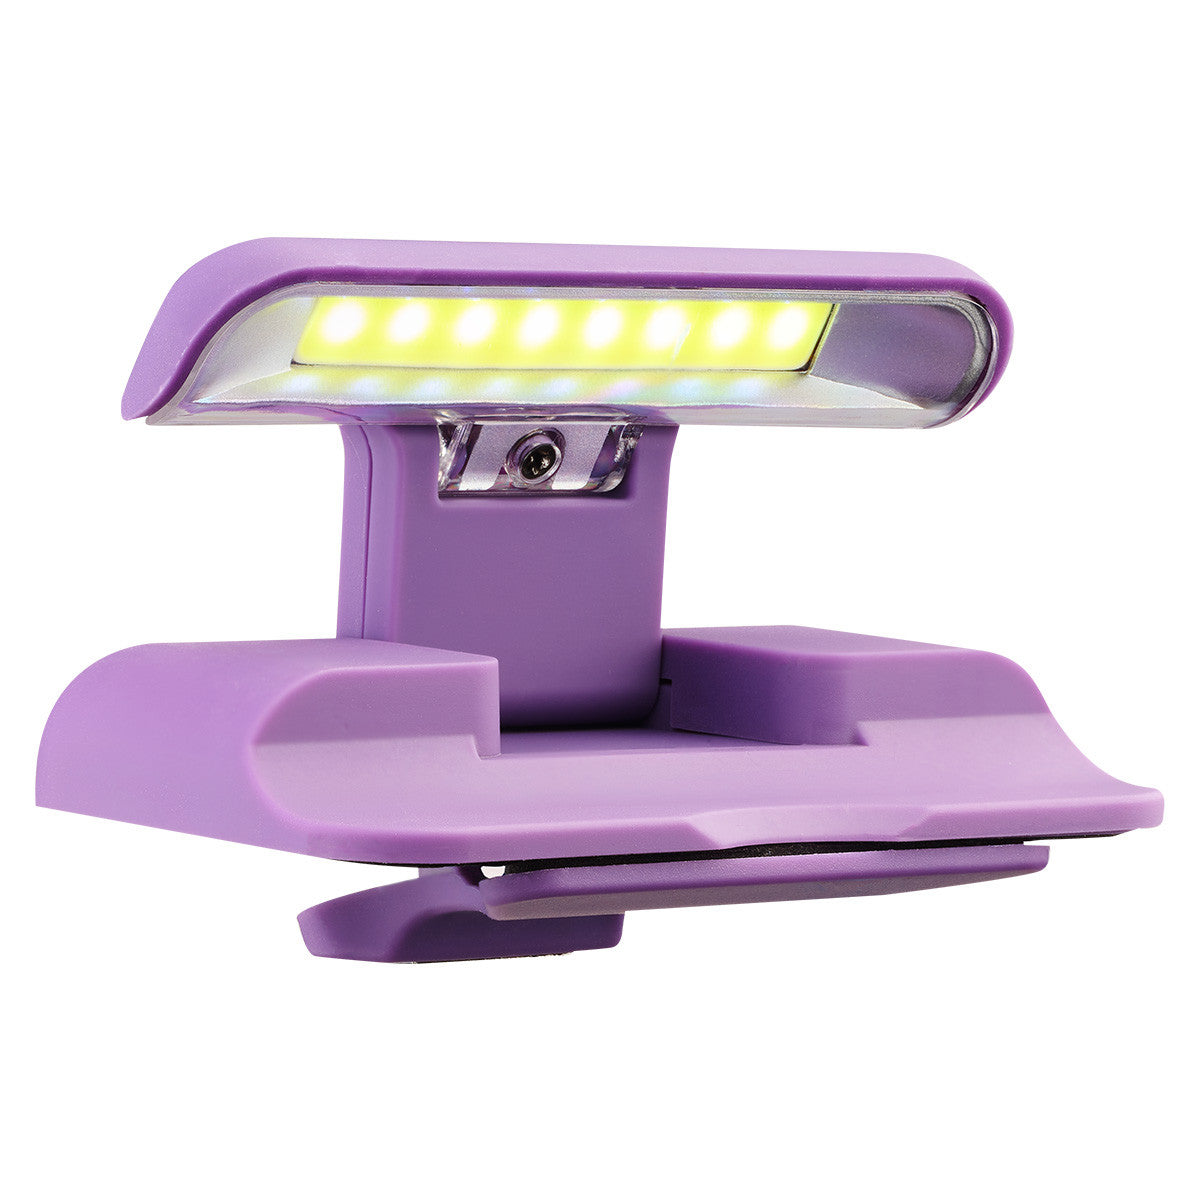 Grace Upon Grace Purple Adjustable Clip-on Book Light - The Christian Gift Company